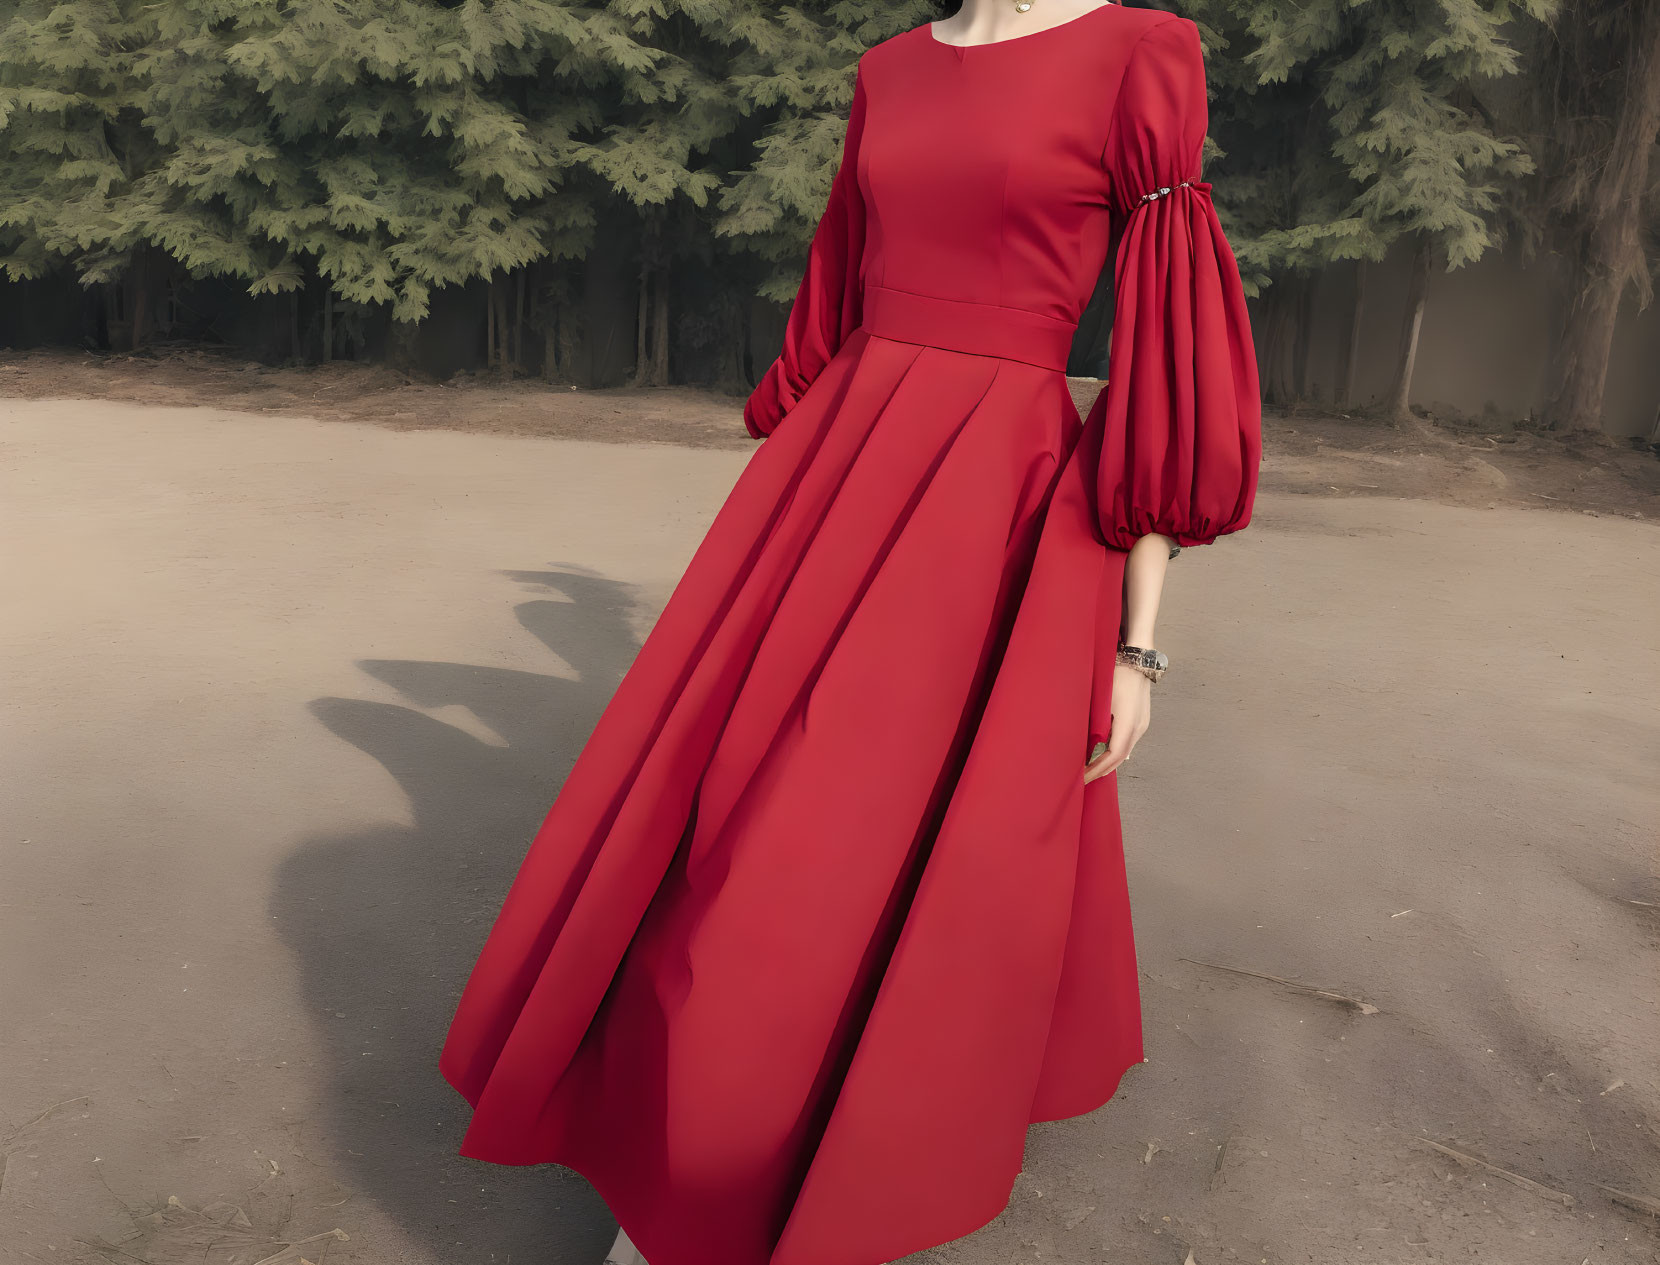 Person in Flowing Red Dress Outdoors with Trees